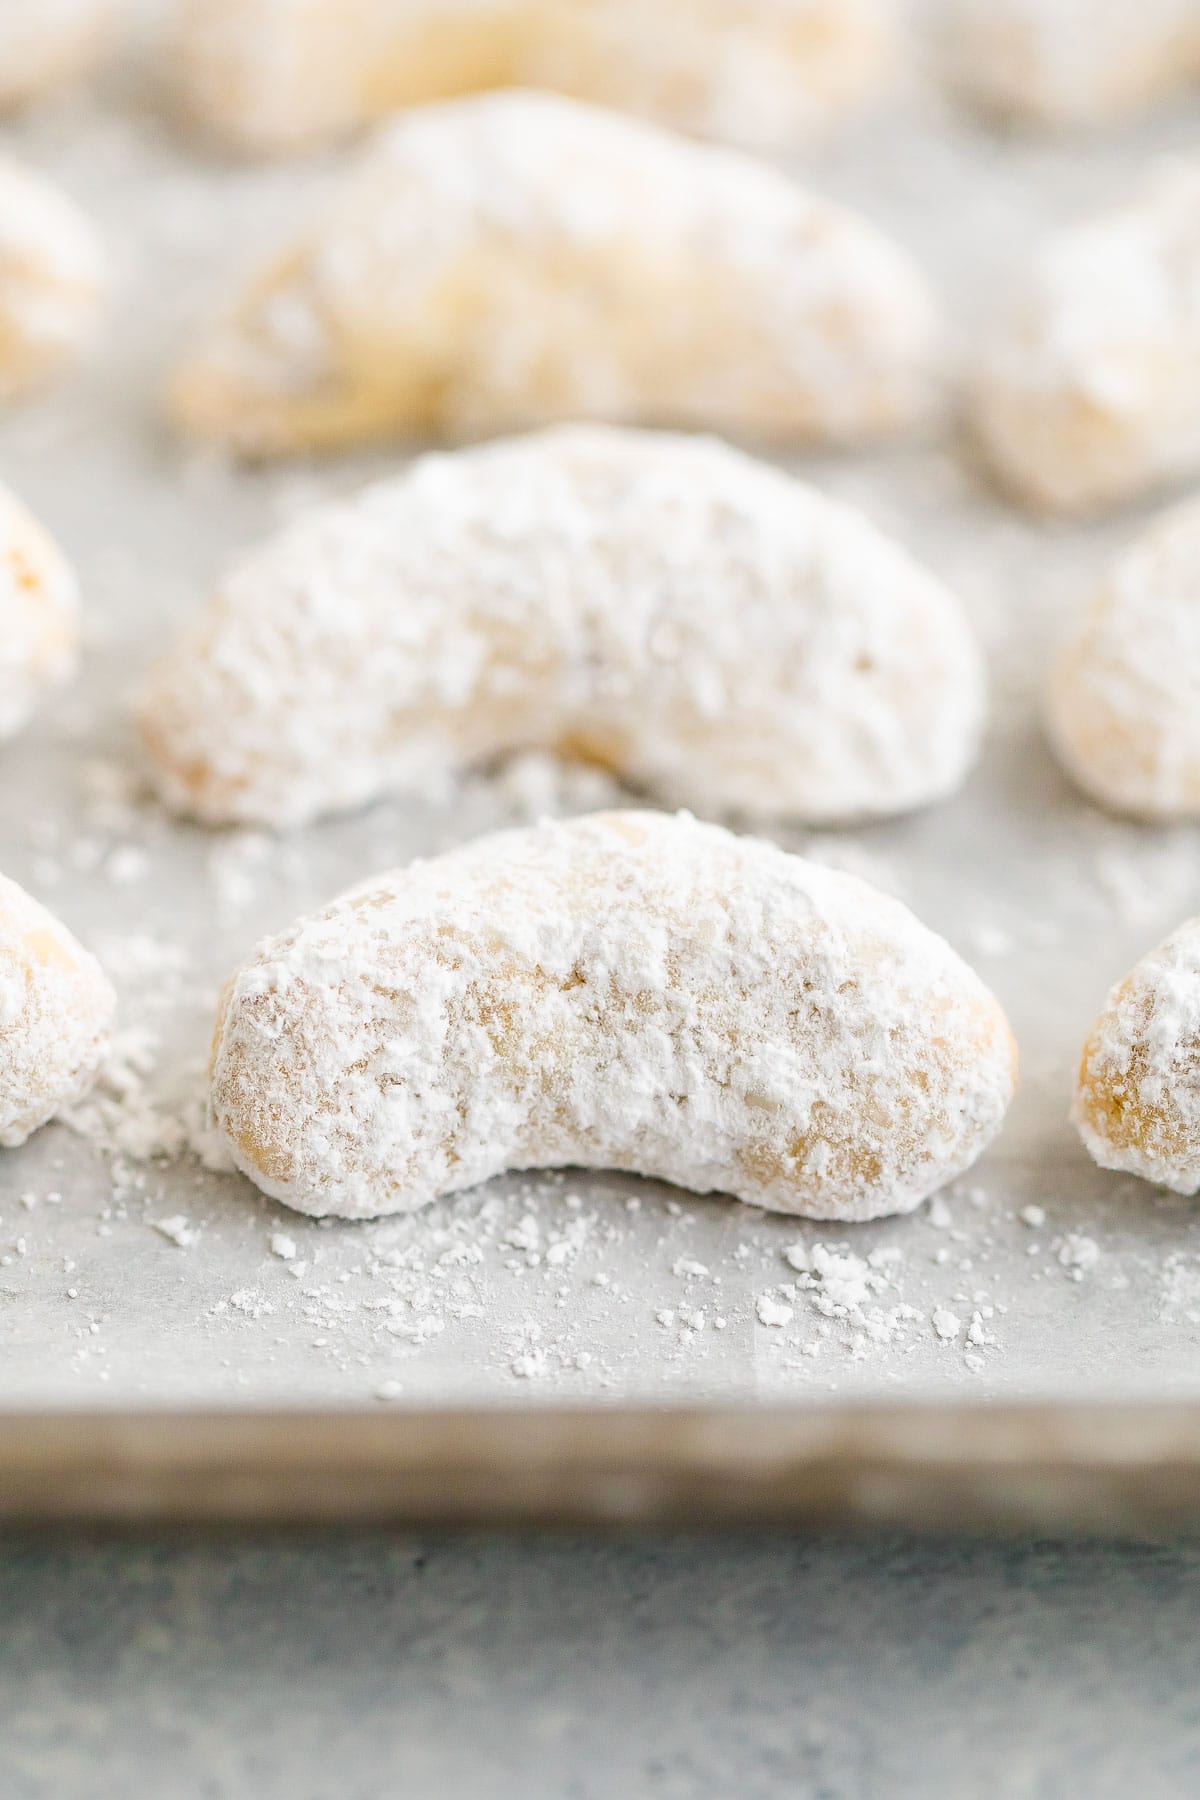 A close up image of almond crescent cookies on a baking sheet with parchment paper.